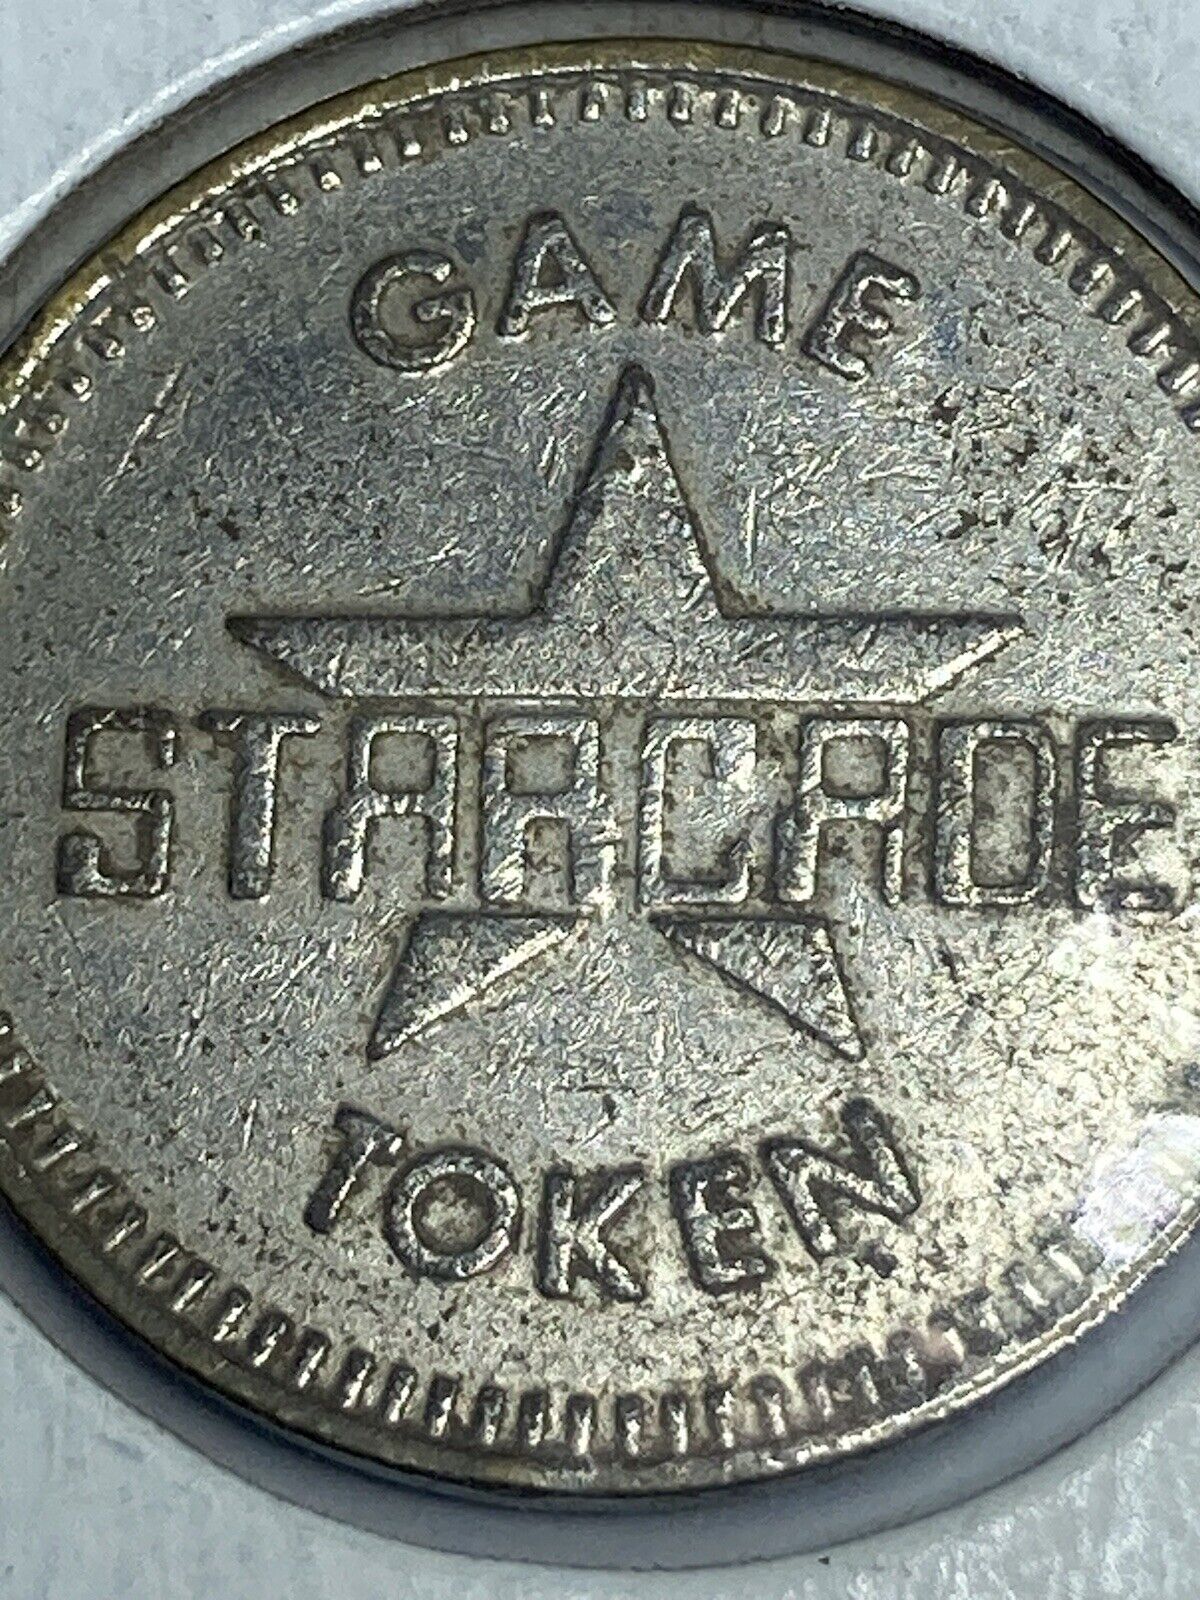 RARE AND BEAUTIFUL STARCADE VINTAGE TOKEN WITH SPACE SHUTTLE ON REVERSE - LOOK